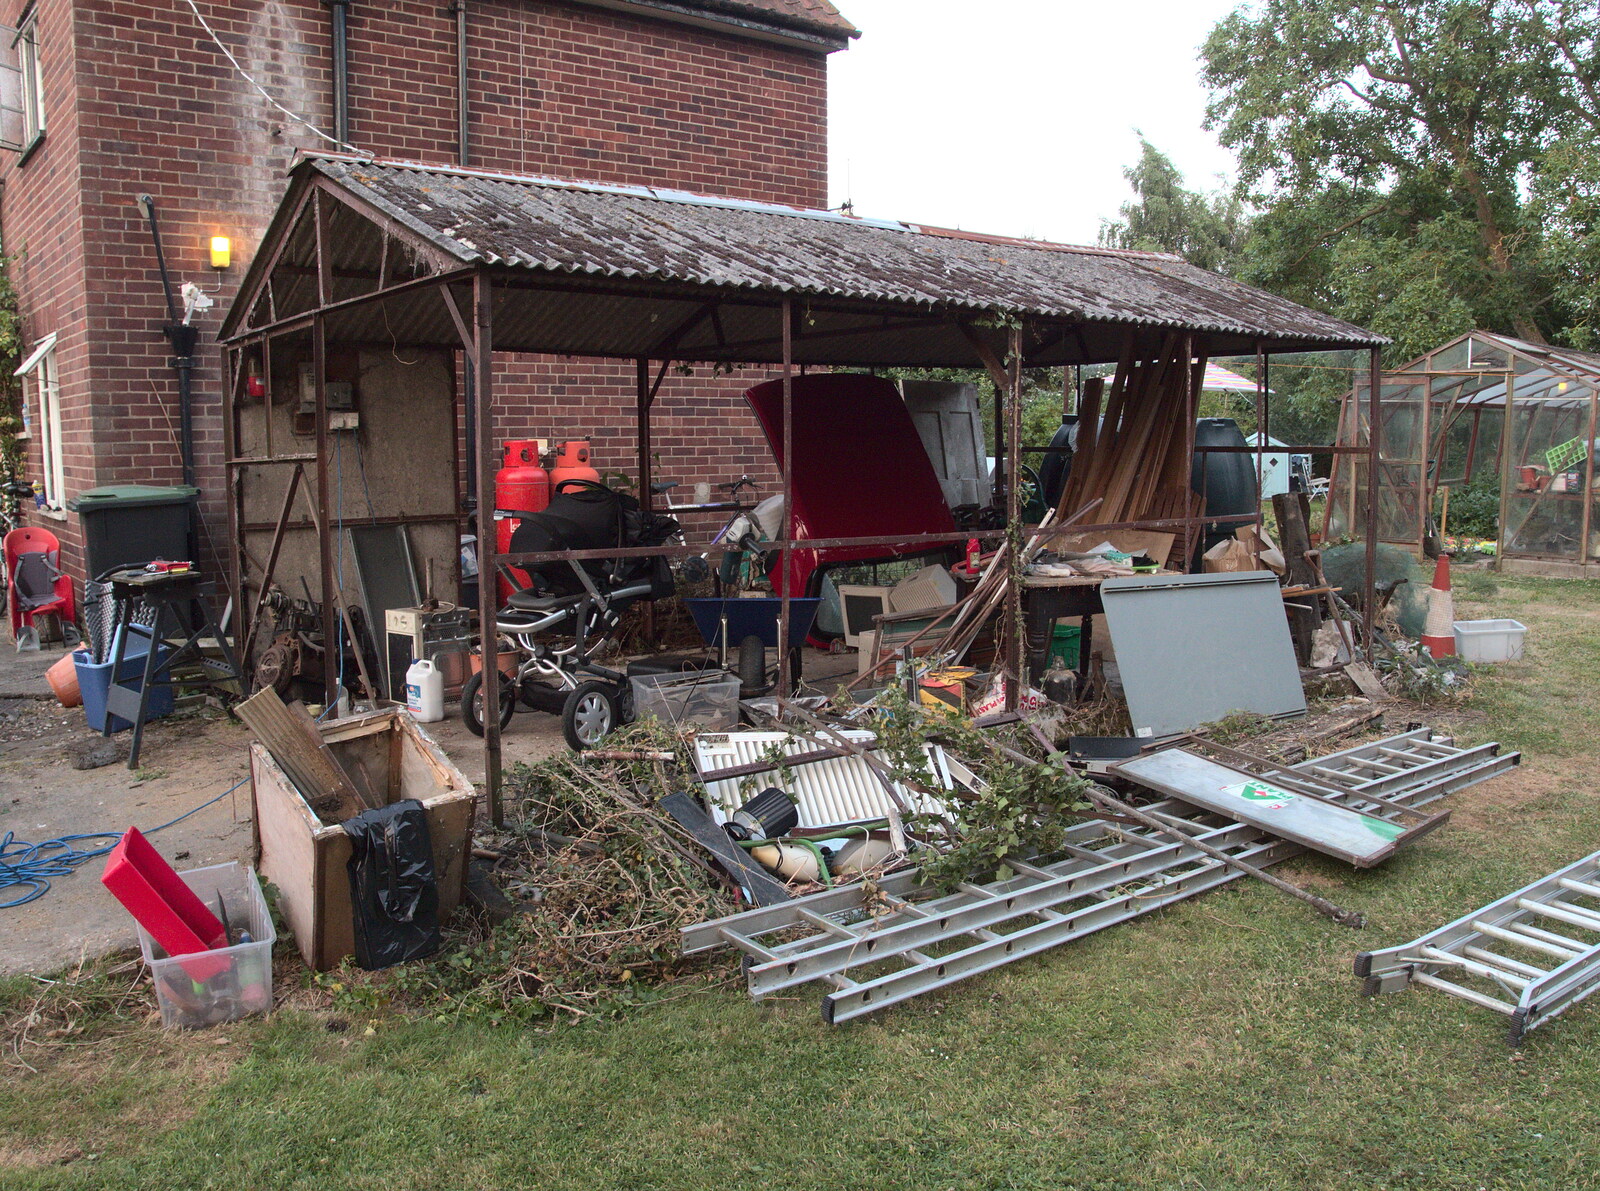 Another view of the garage from The Demolition of the Garage, Brome, Suffolk - 17th July 2013